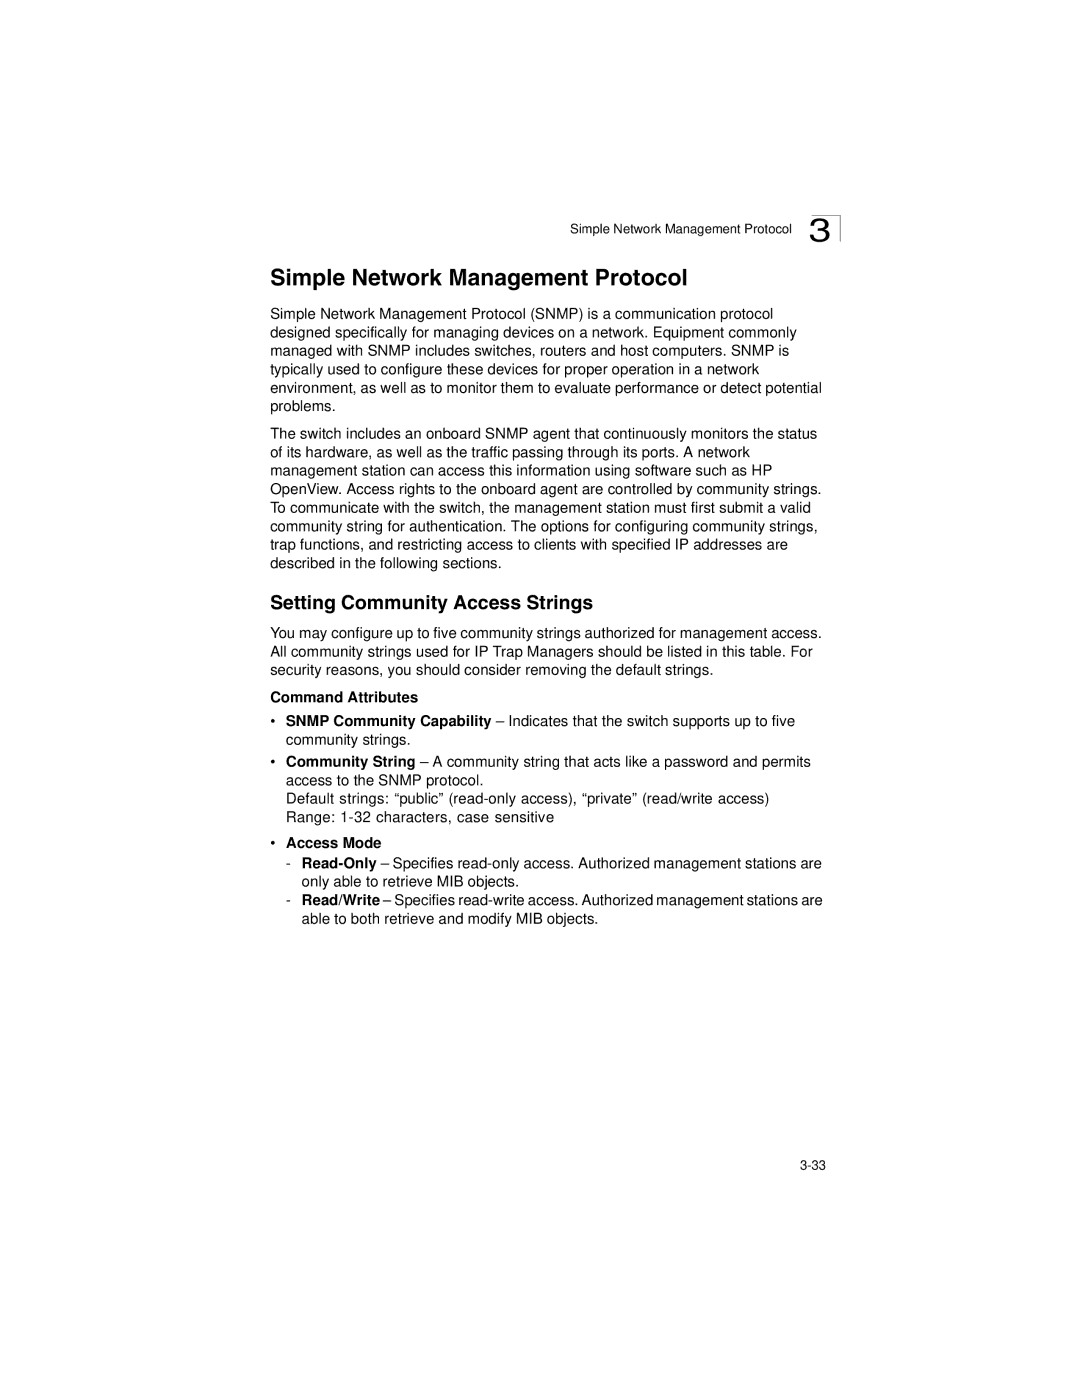 LevelOne GSW-2692 manual Simple Network Management Protocol, Setting Community Access Strings, Access Mode 